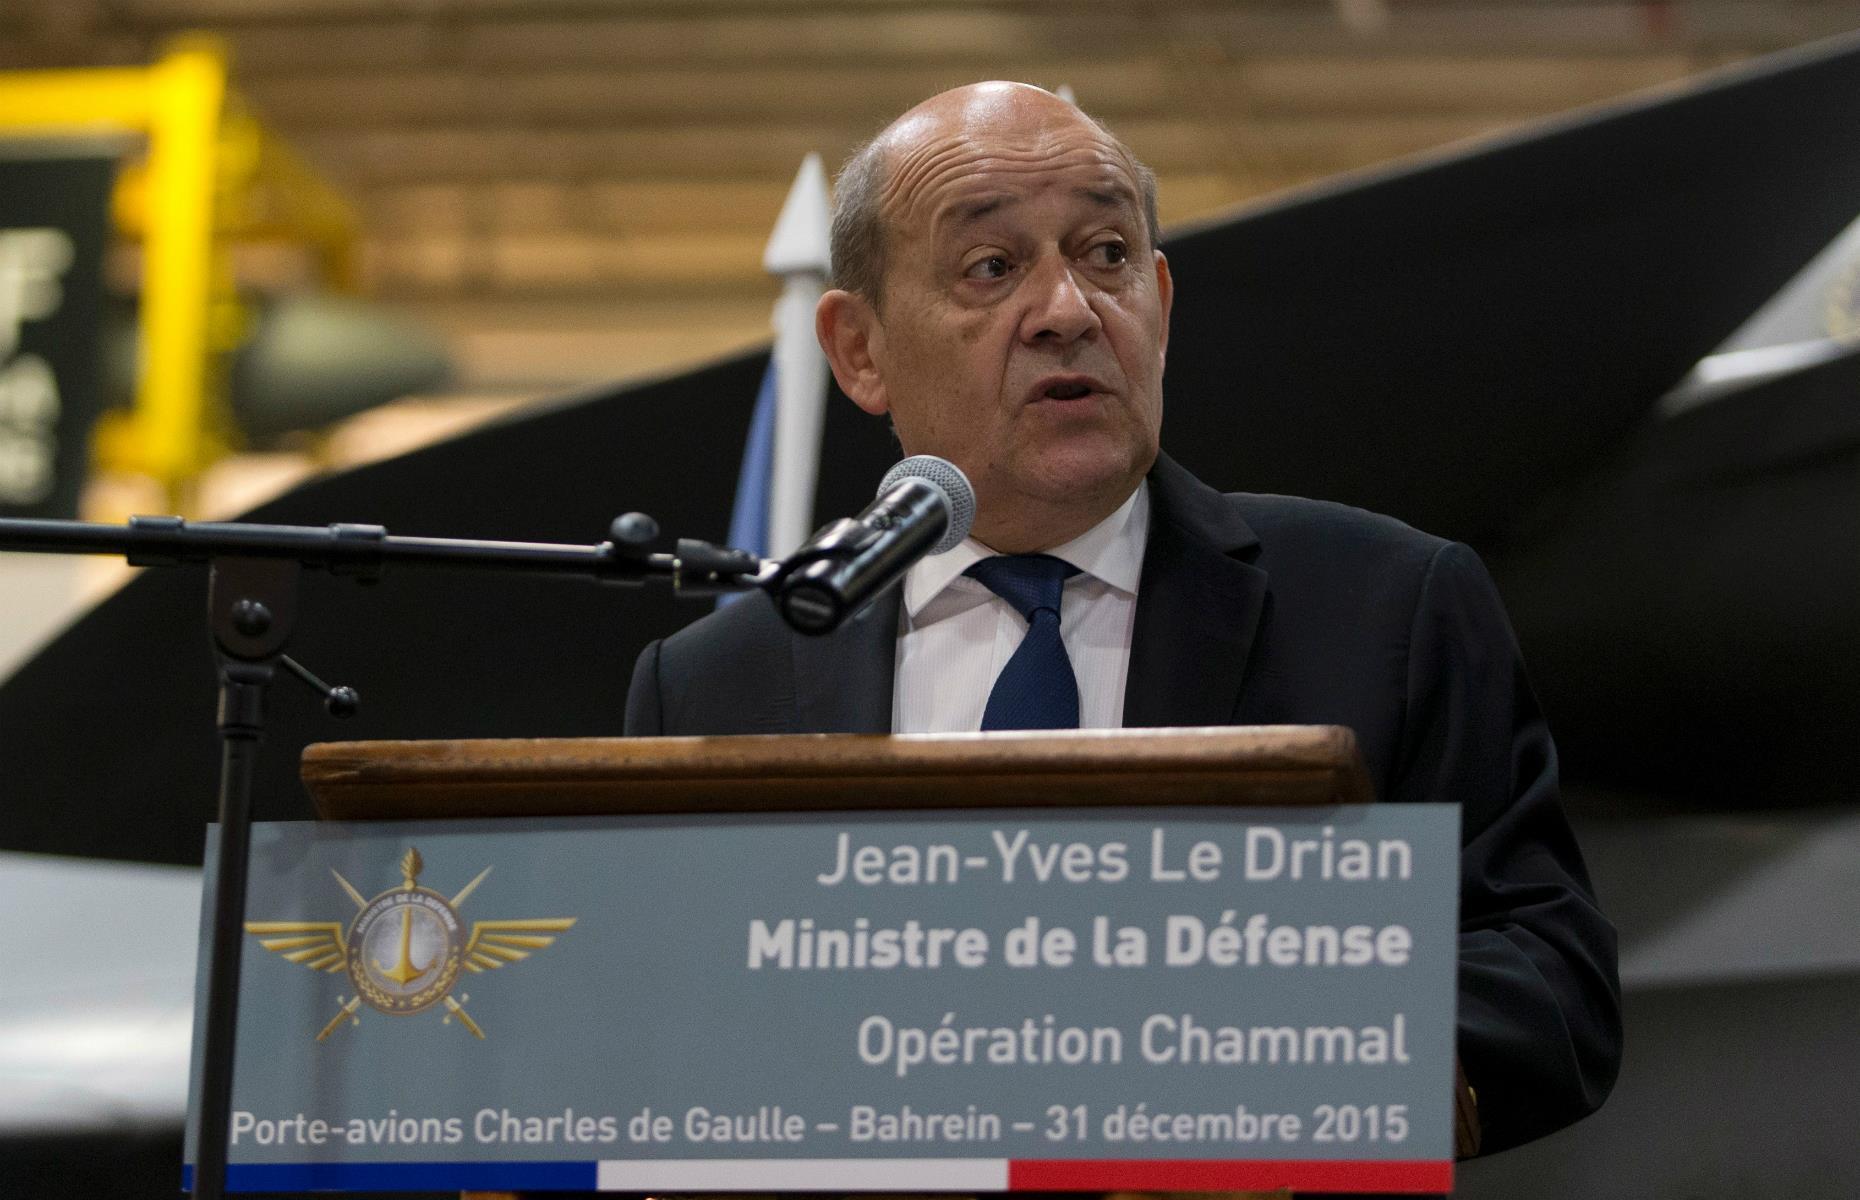 Gilbert Chikli and Anthony Lasarevitsch posed as French politician Jean-Yves Le Drian